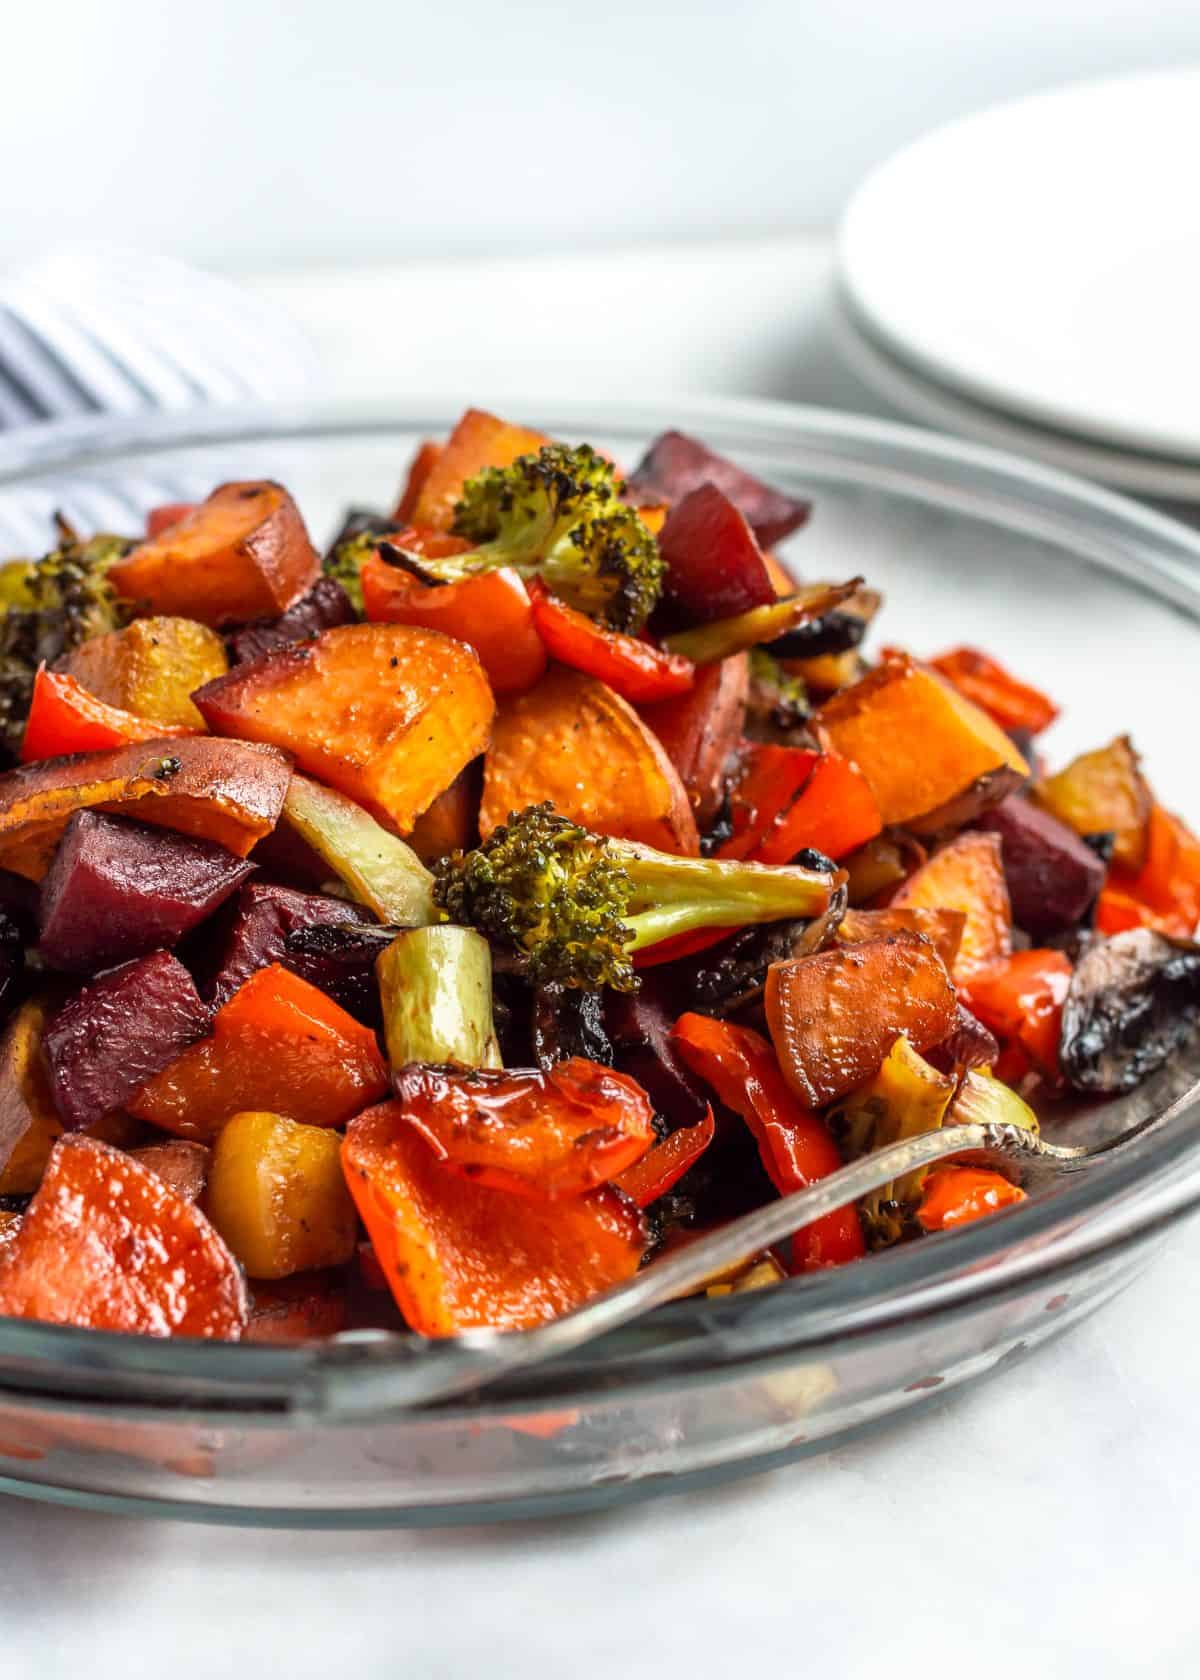 Deliicous Balsamic Honey Roasted Vegetables in a glass bowl with a spoon.